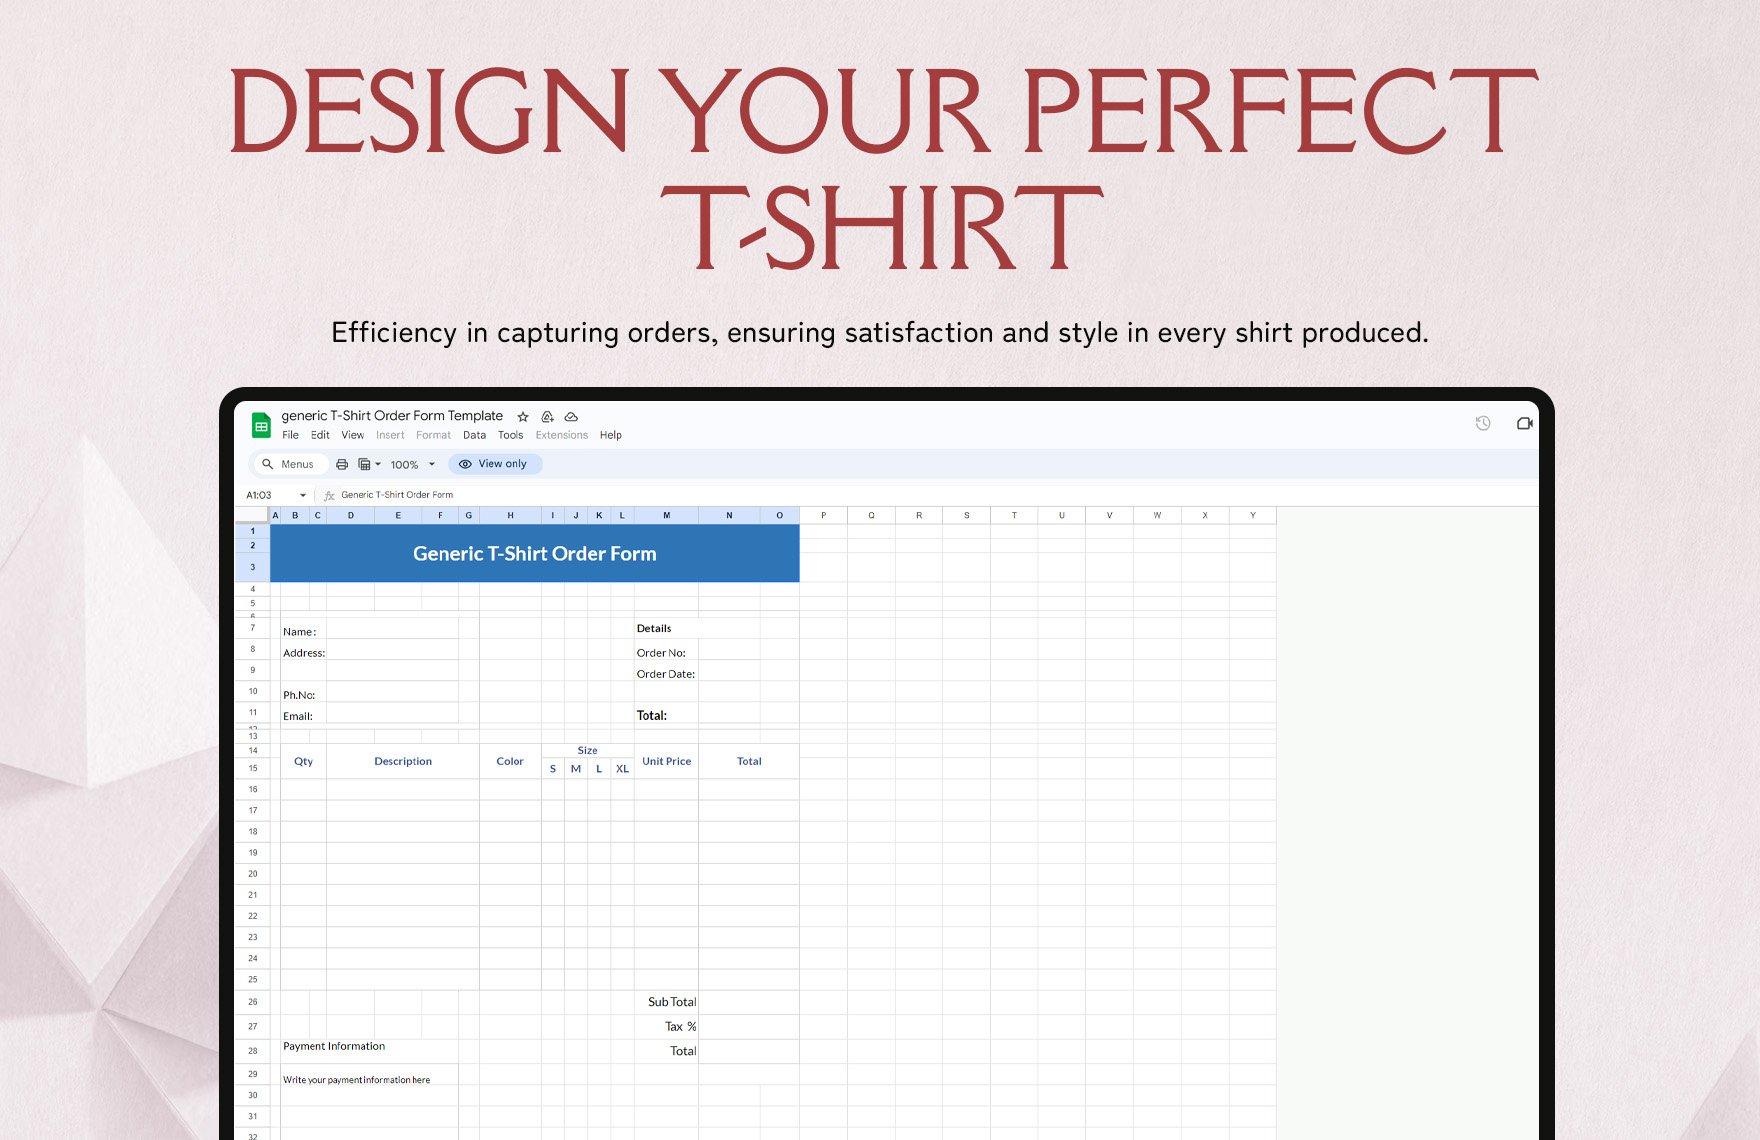 Generic T-Shirt Order Form Template